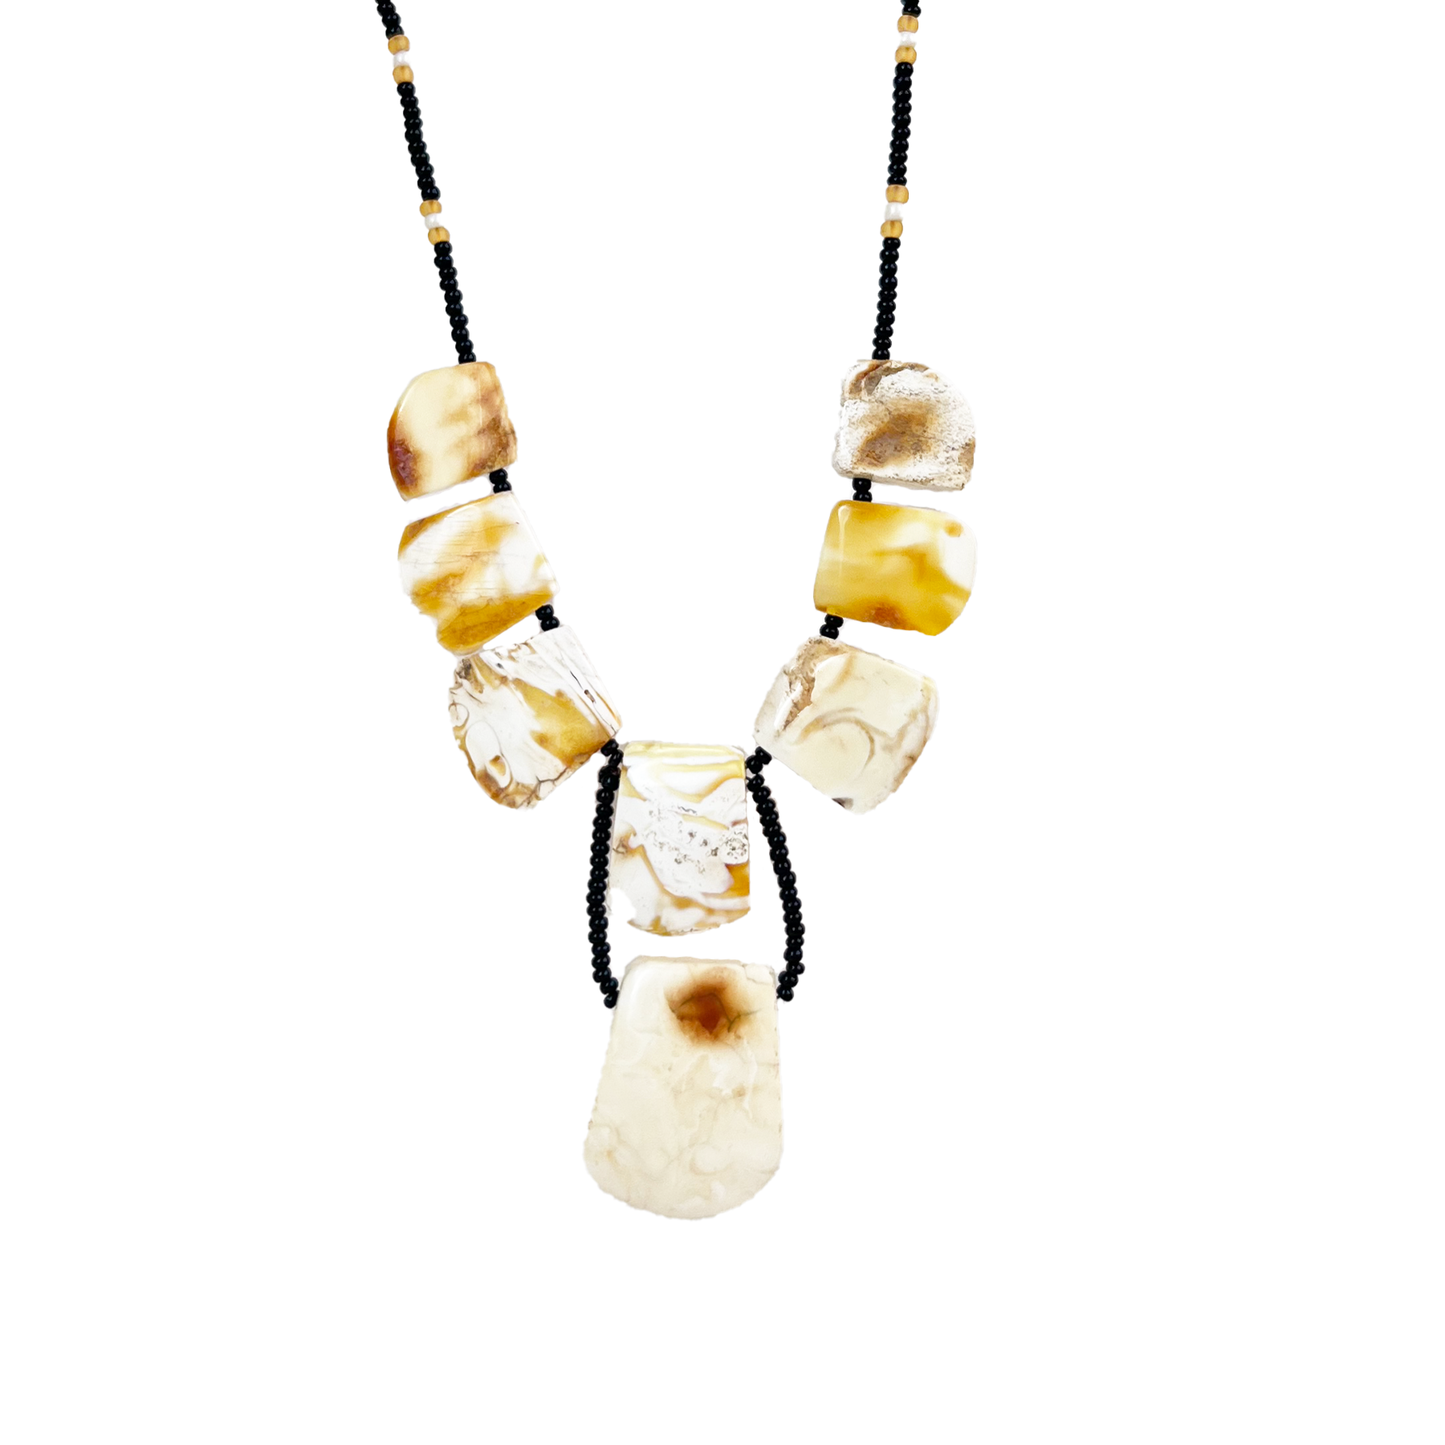 Amber necklace with clouds, "Cuba"